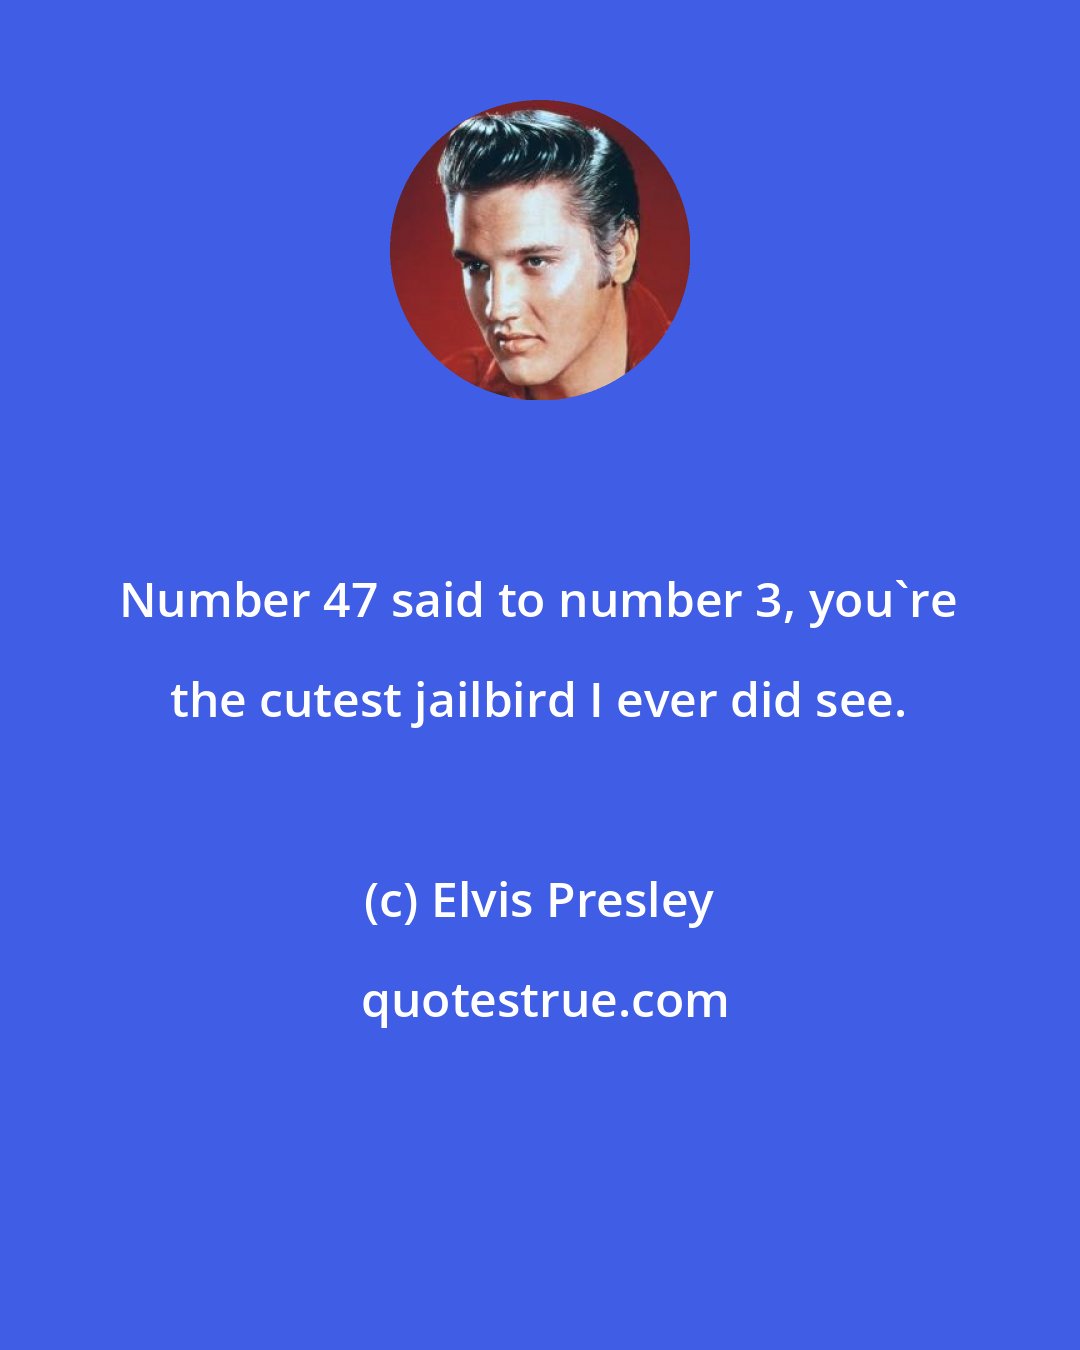 Elvis Presley: Number 47 said to number 3, you're the cutest jailbird I ever did see.